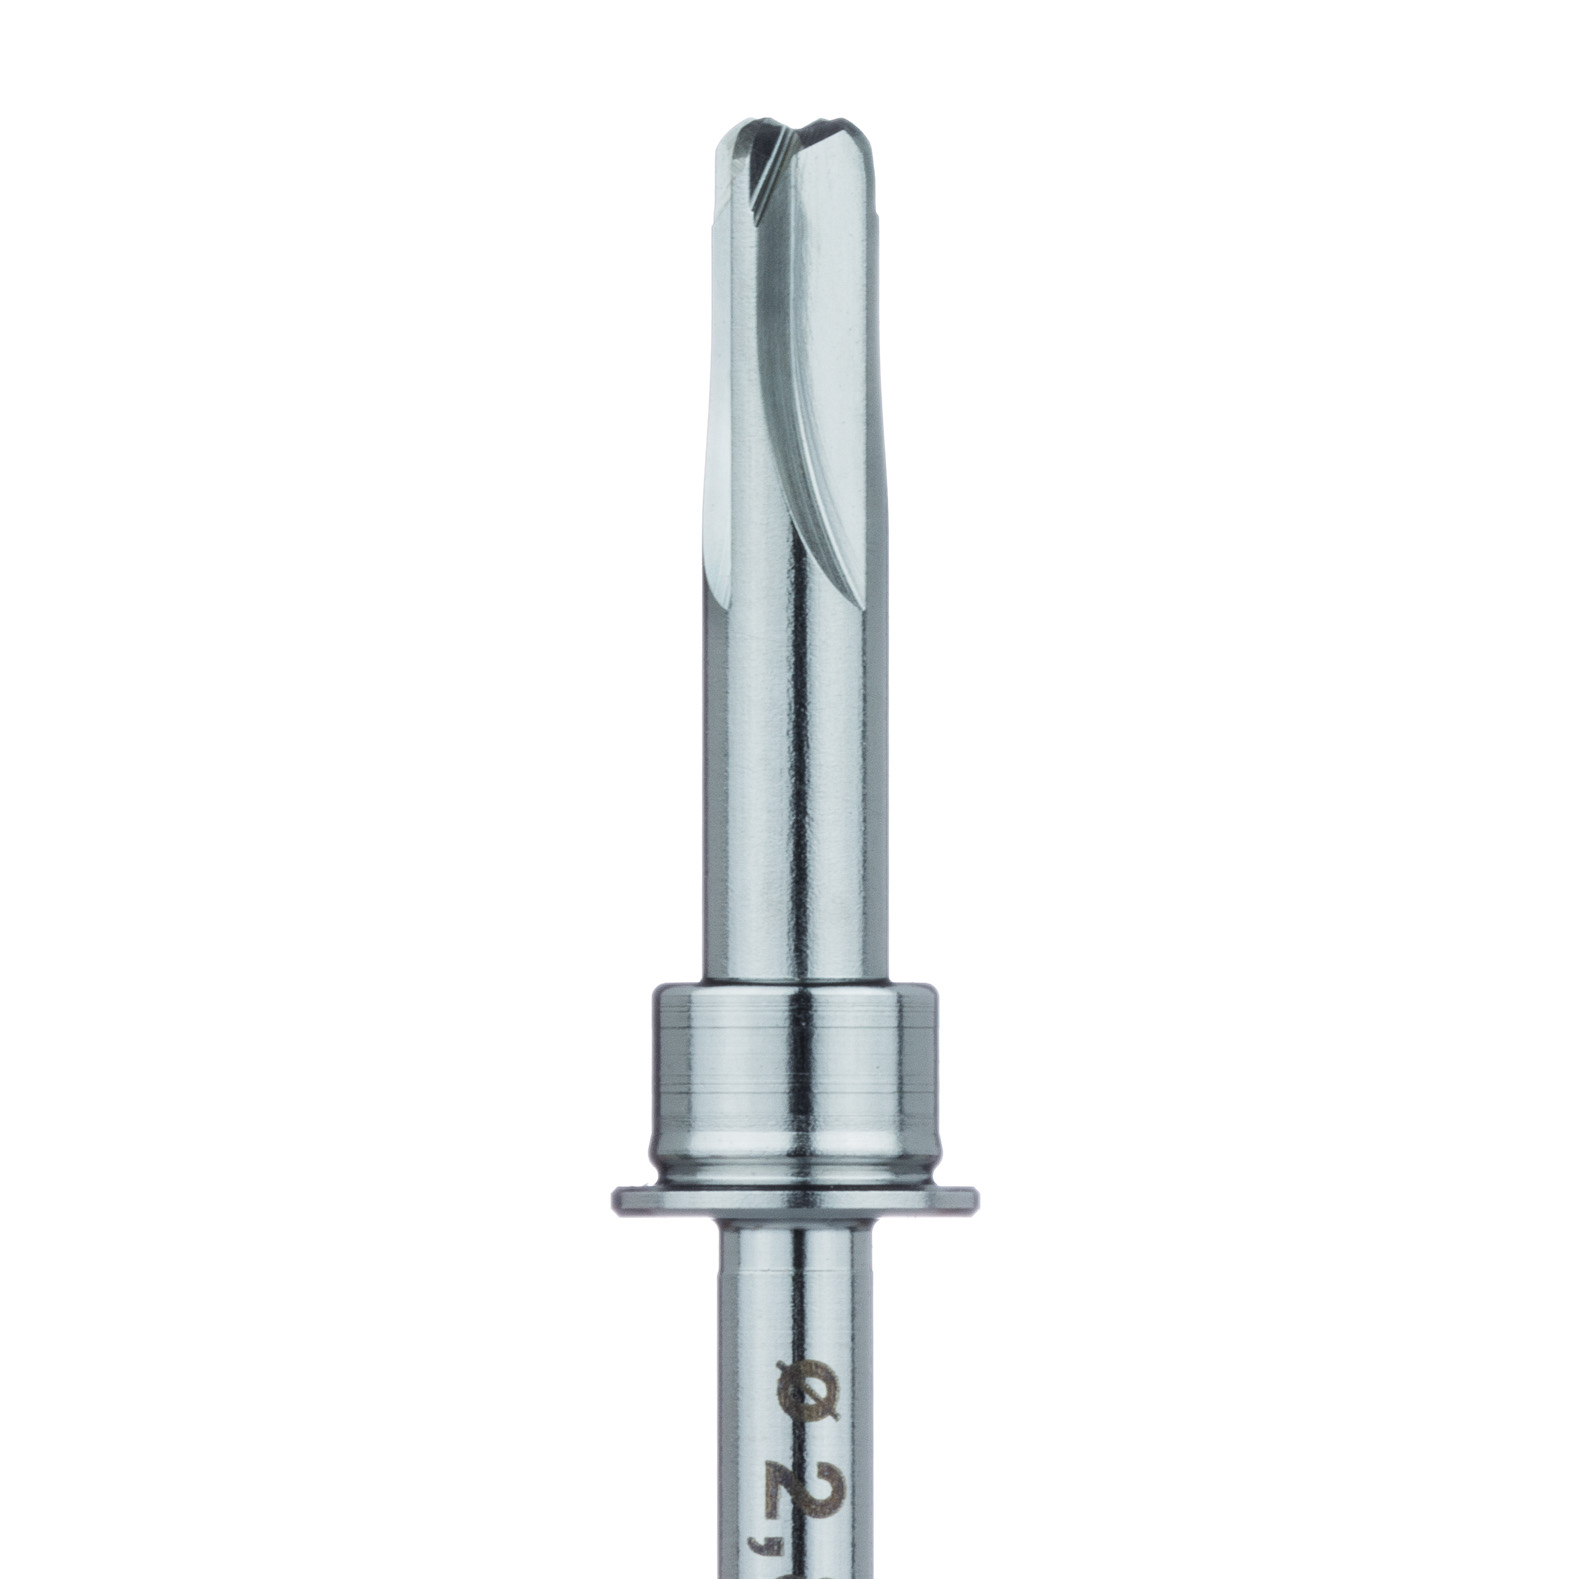 CL002 Surgery, Crestal Drill with Stop, 2.8mm Ø, RAXL